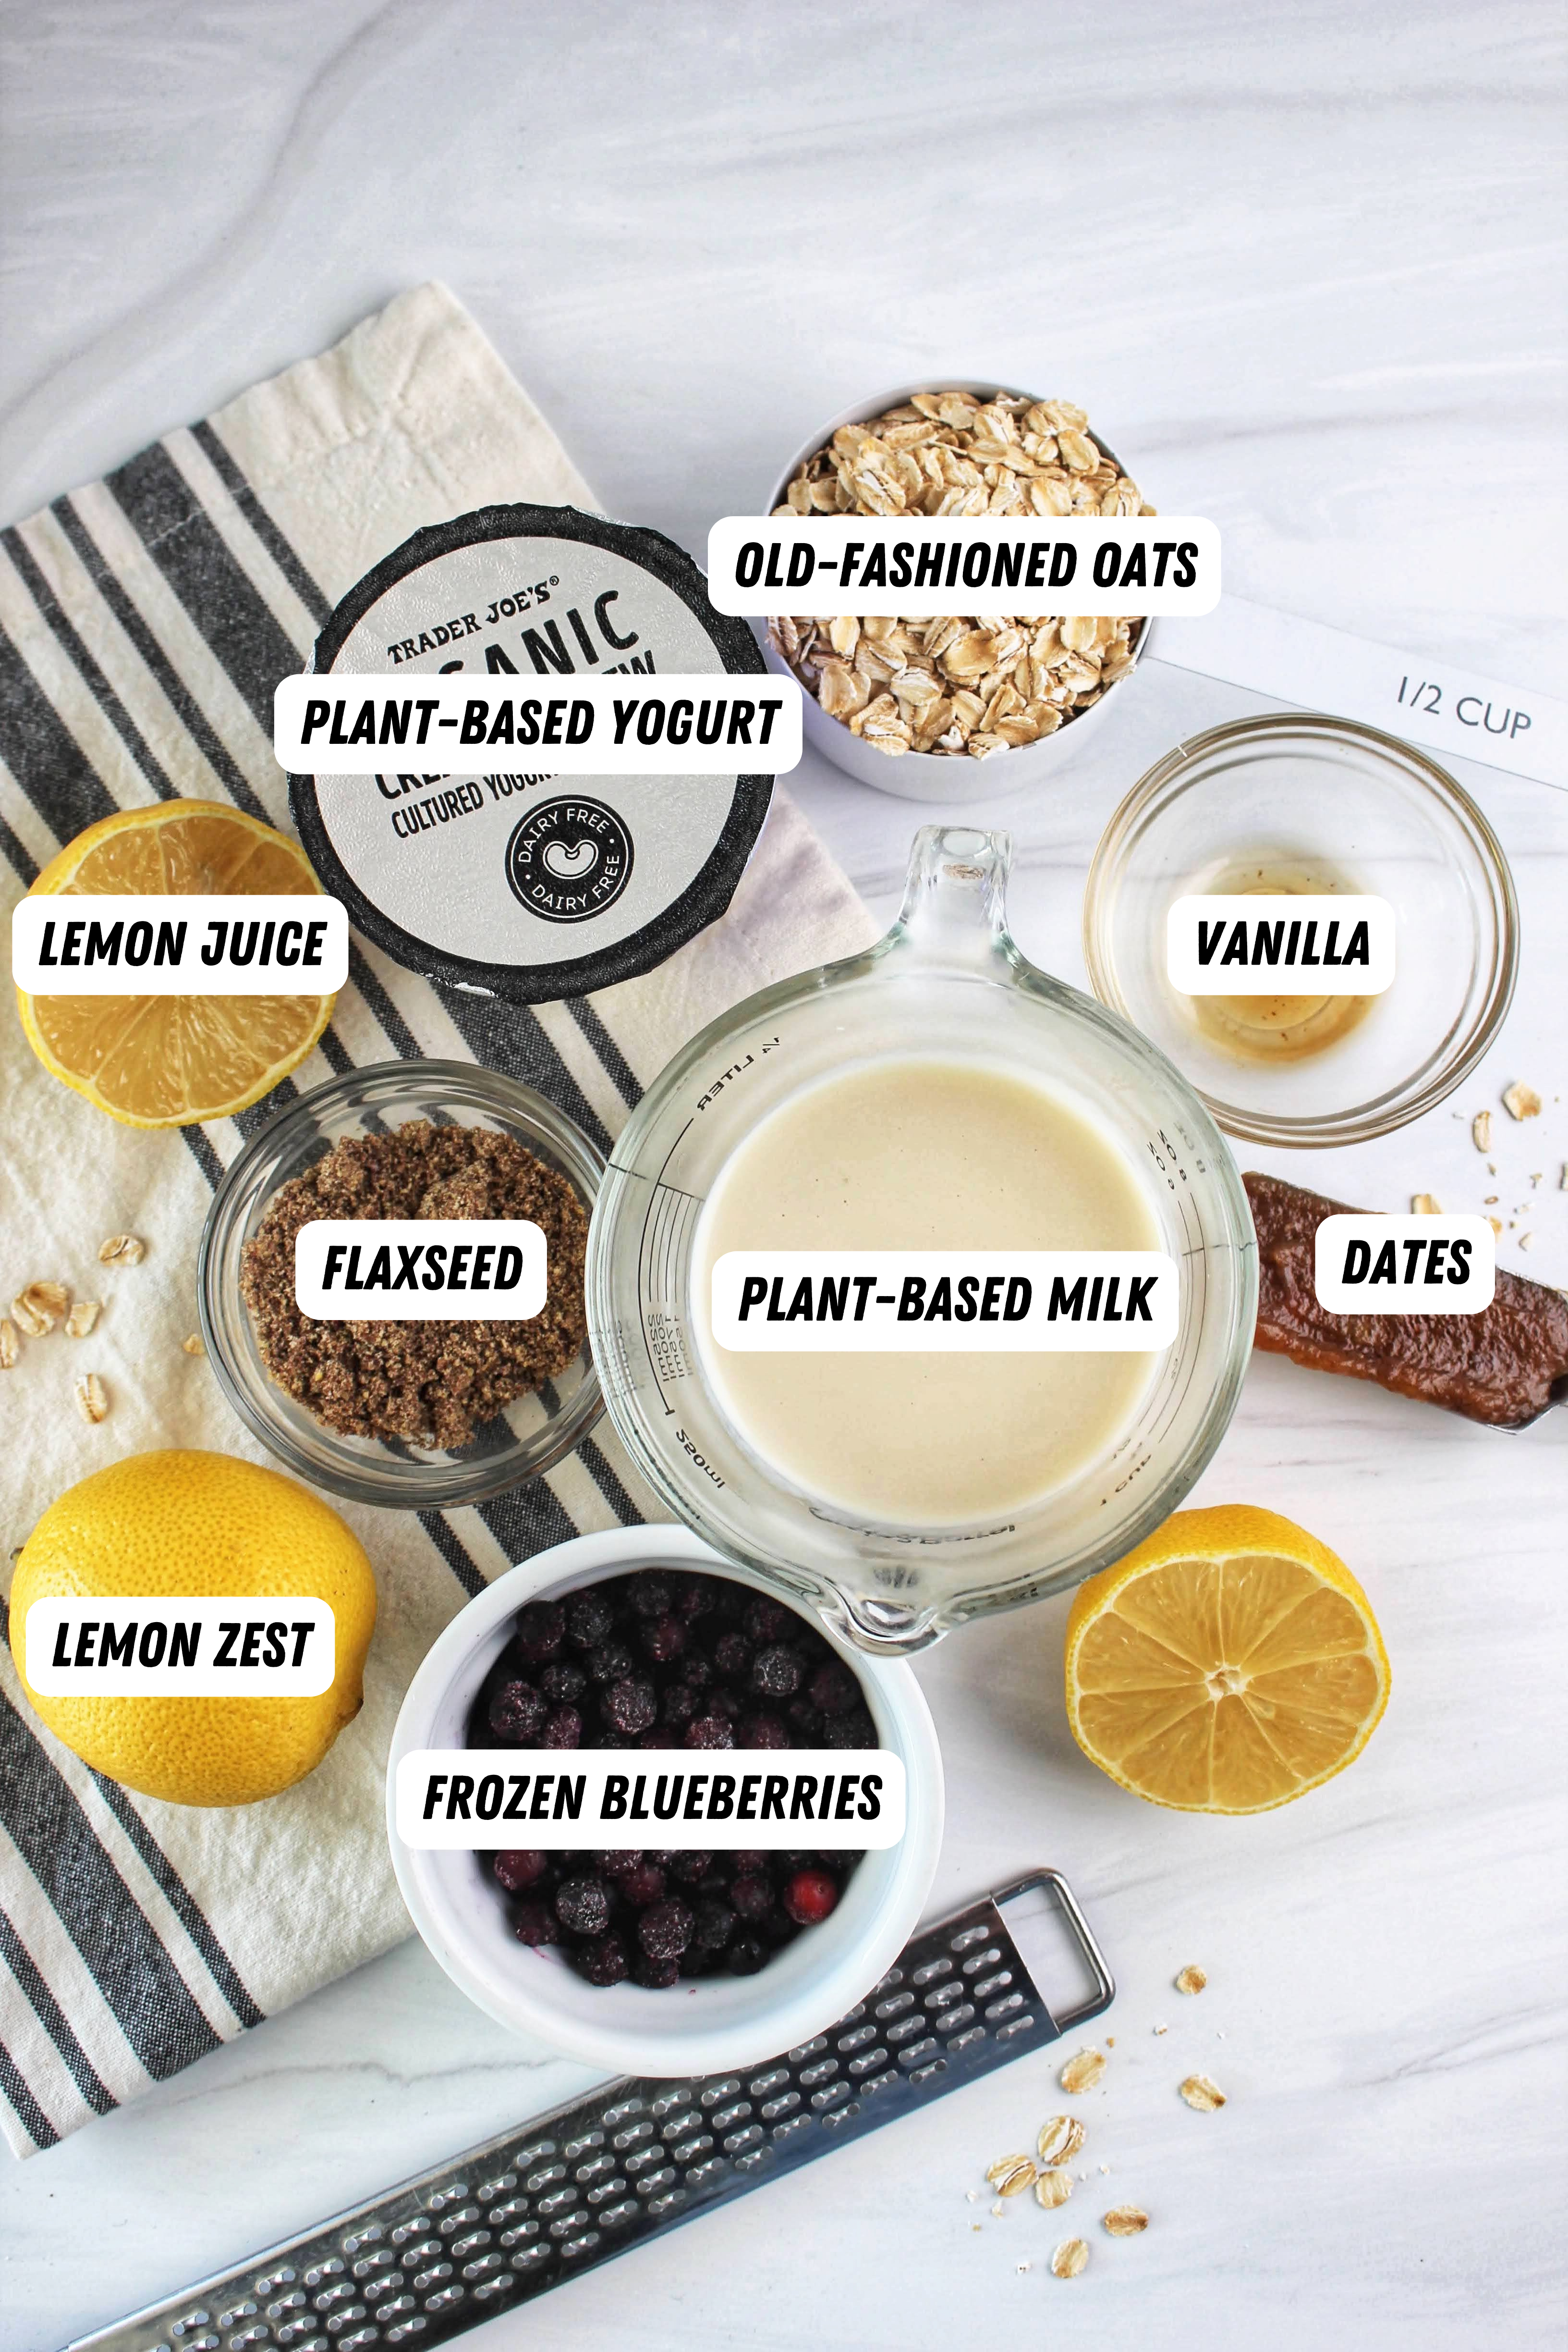 All of the ingredients needed for these overnight oats.